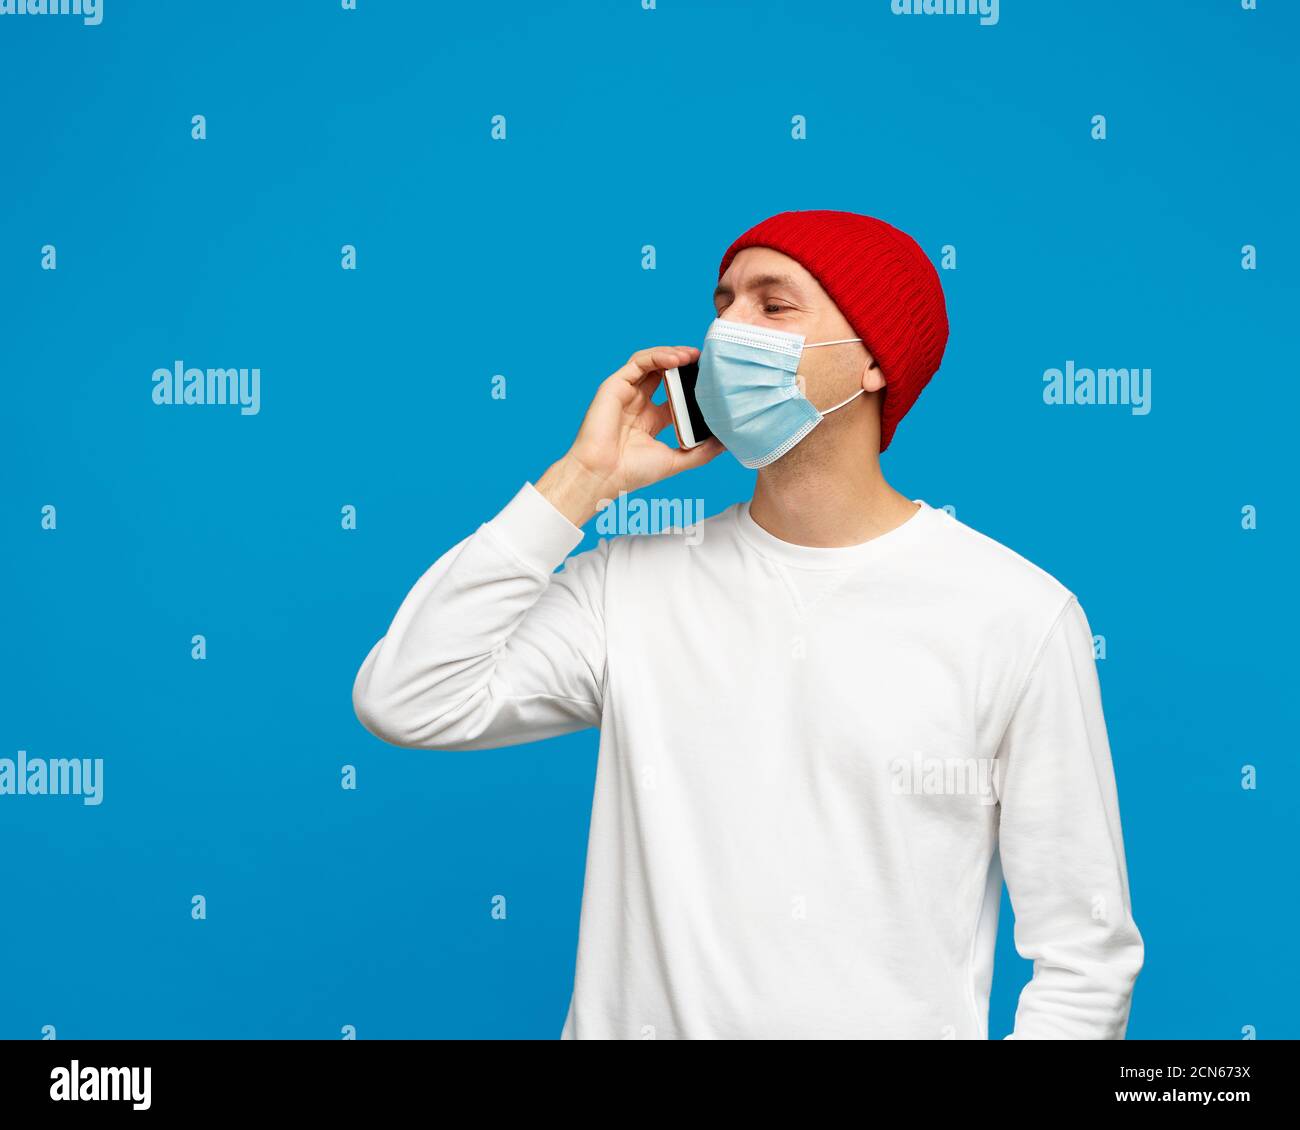 Portrait of man with medical protective face mask, speaking to mobile phone. Male isolated on bright blue colored background. White jumper and red hat. Stock Photo